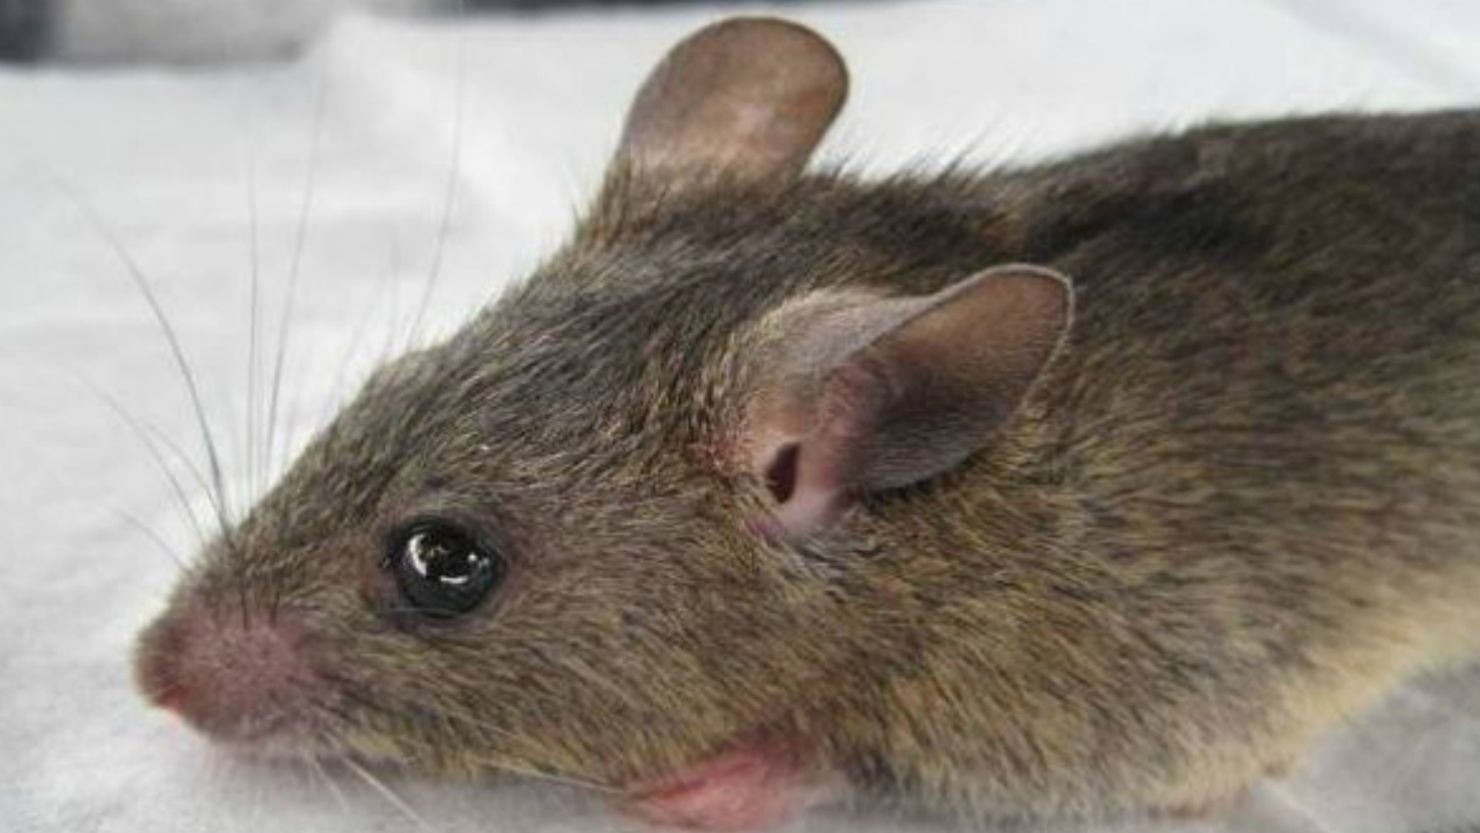 Contact with feces or urine from an infected multimammate rat is the primary way Lassa fever spreads.